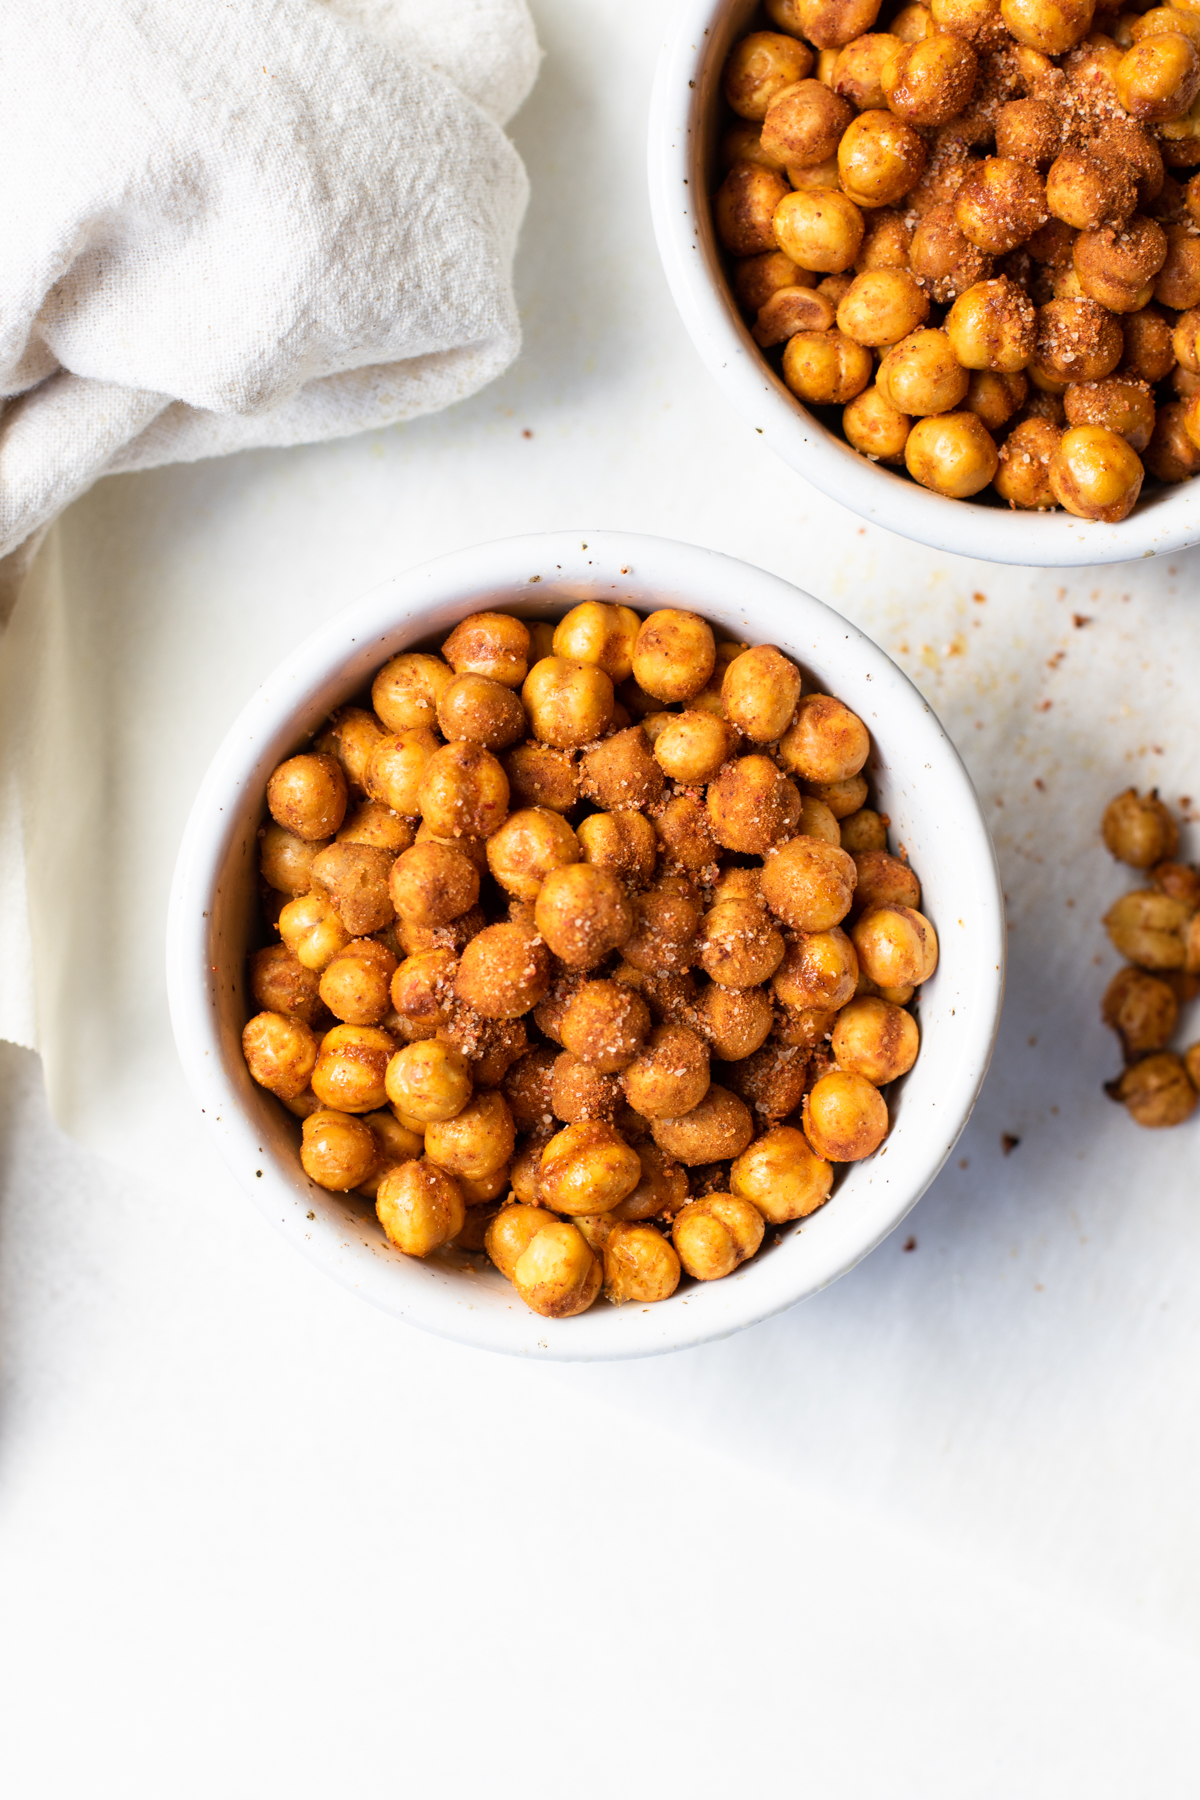 Overhead view of air fryer chickpeas in a white bowl with beige napkin.